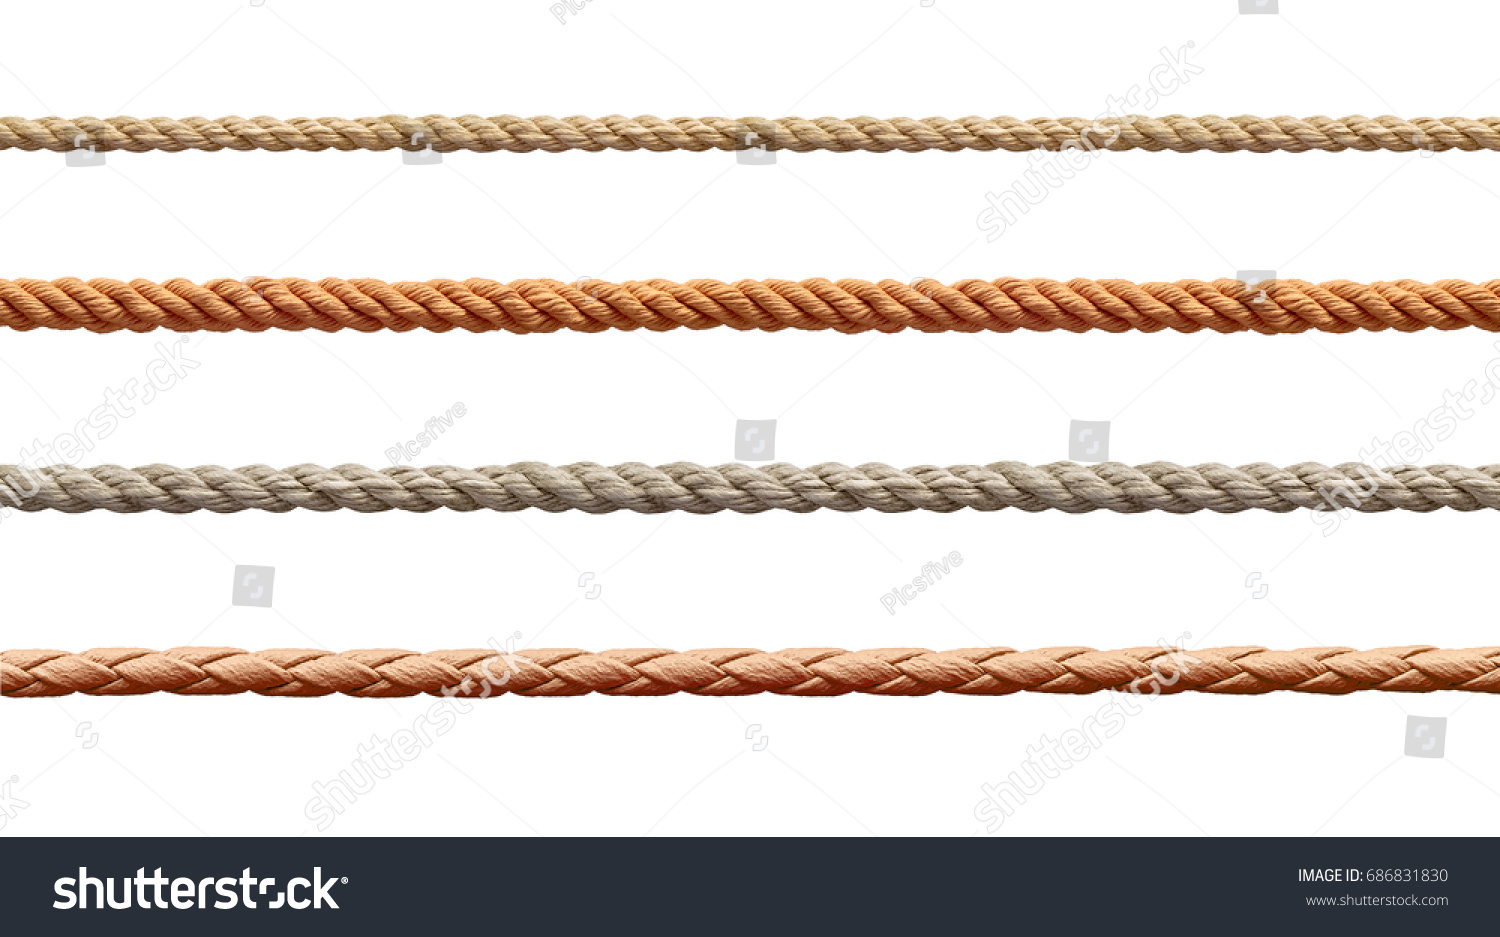 collection of  various ropes string on white background. each one is shot separately #686831830